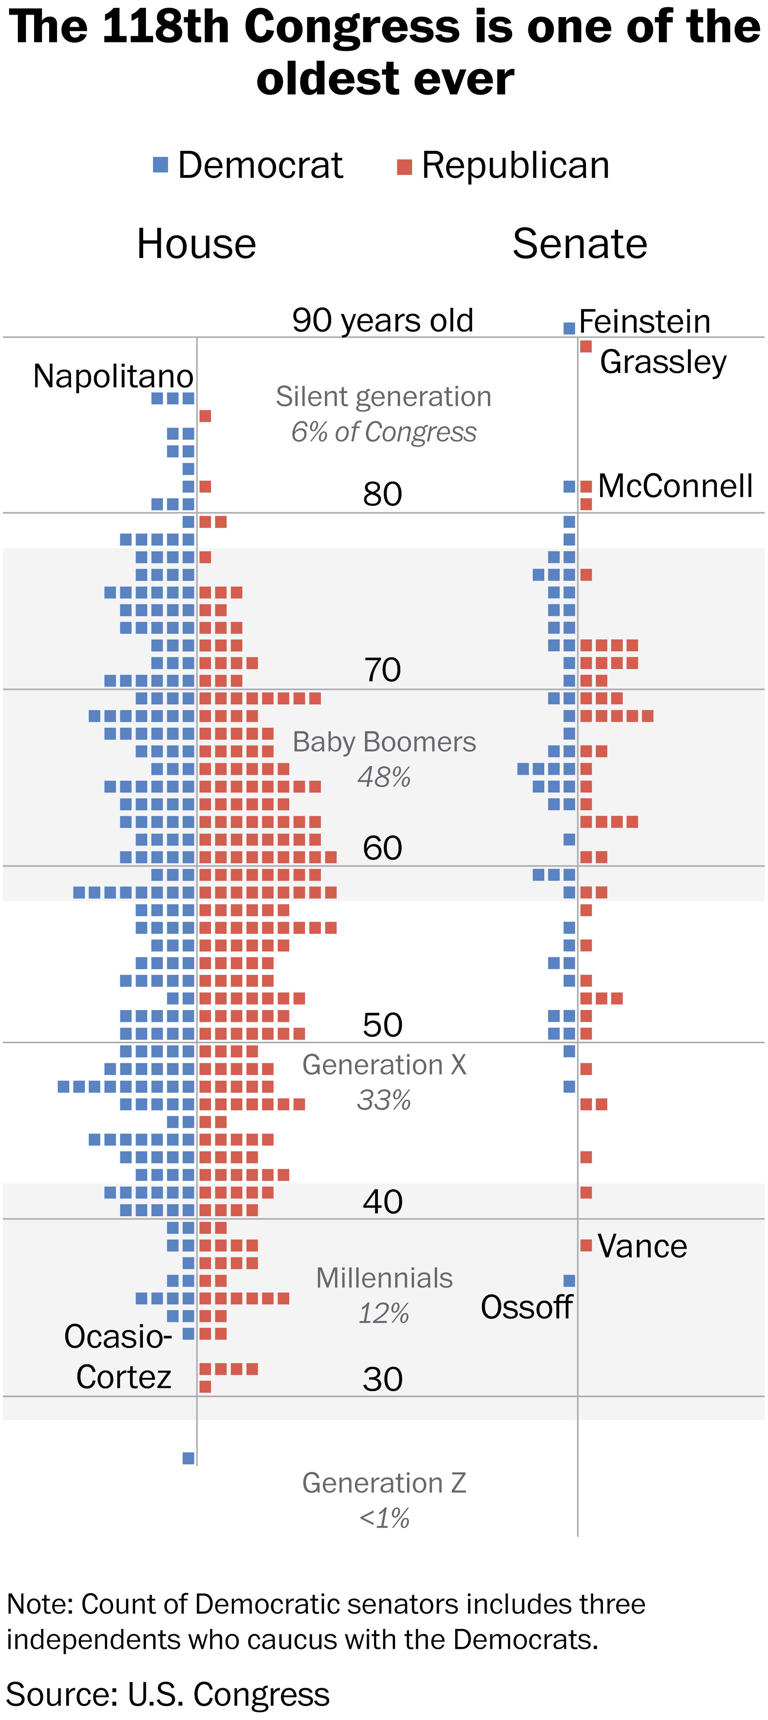 The average age of Congress is rising. That’s unlikely to change soon.